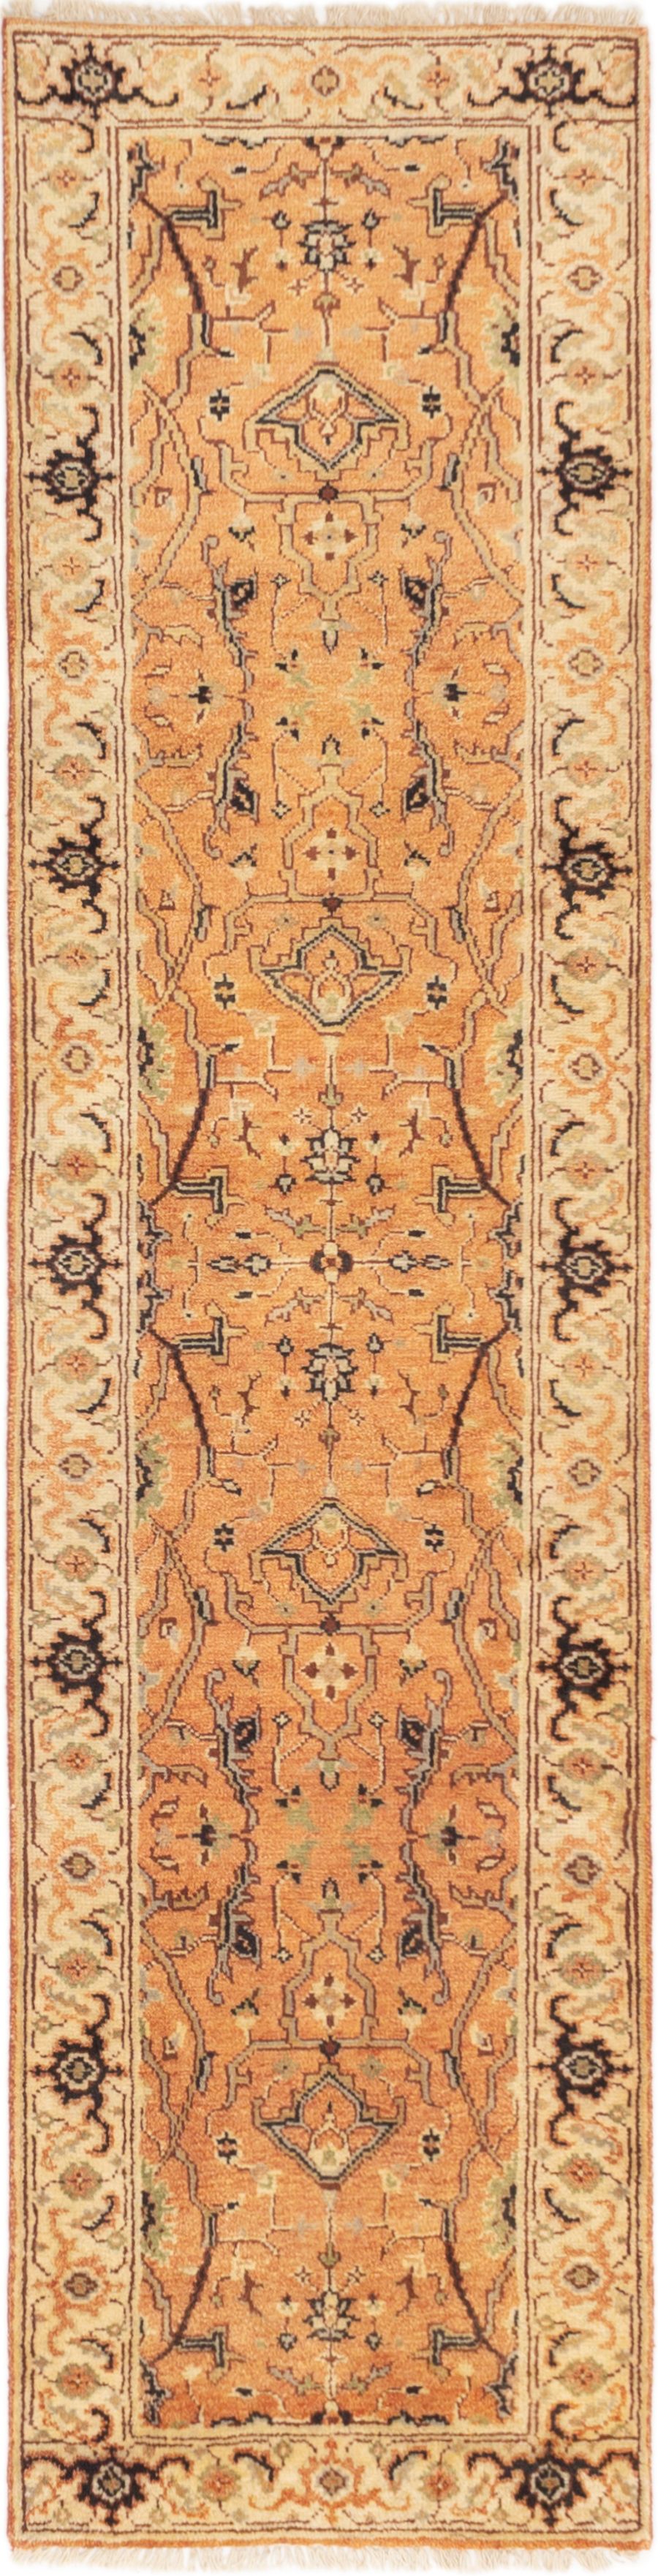 Hand-knotted Serapi Heritage Copper Wool Rug 2'7" x 10'1"  Size: 2'7" x 10'1"  